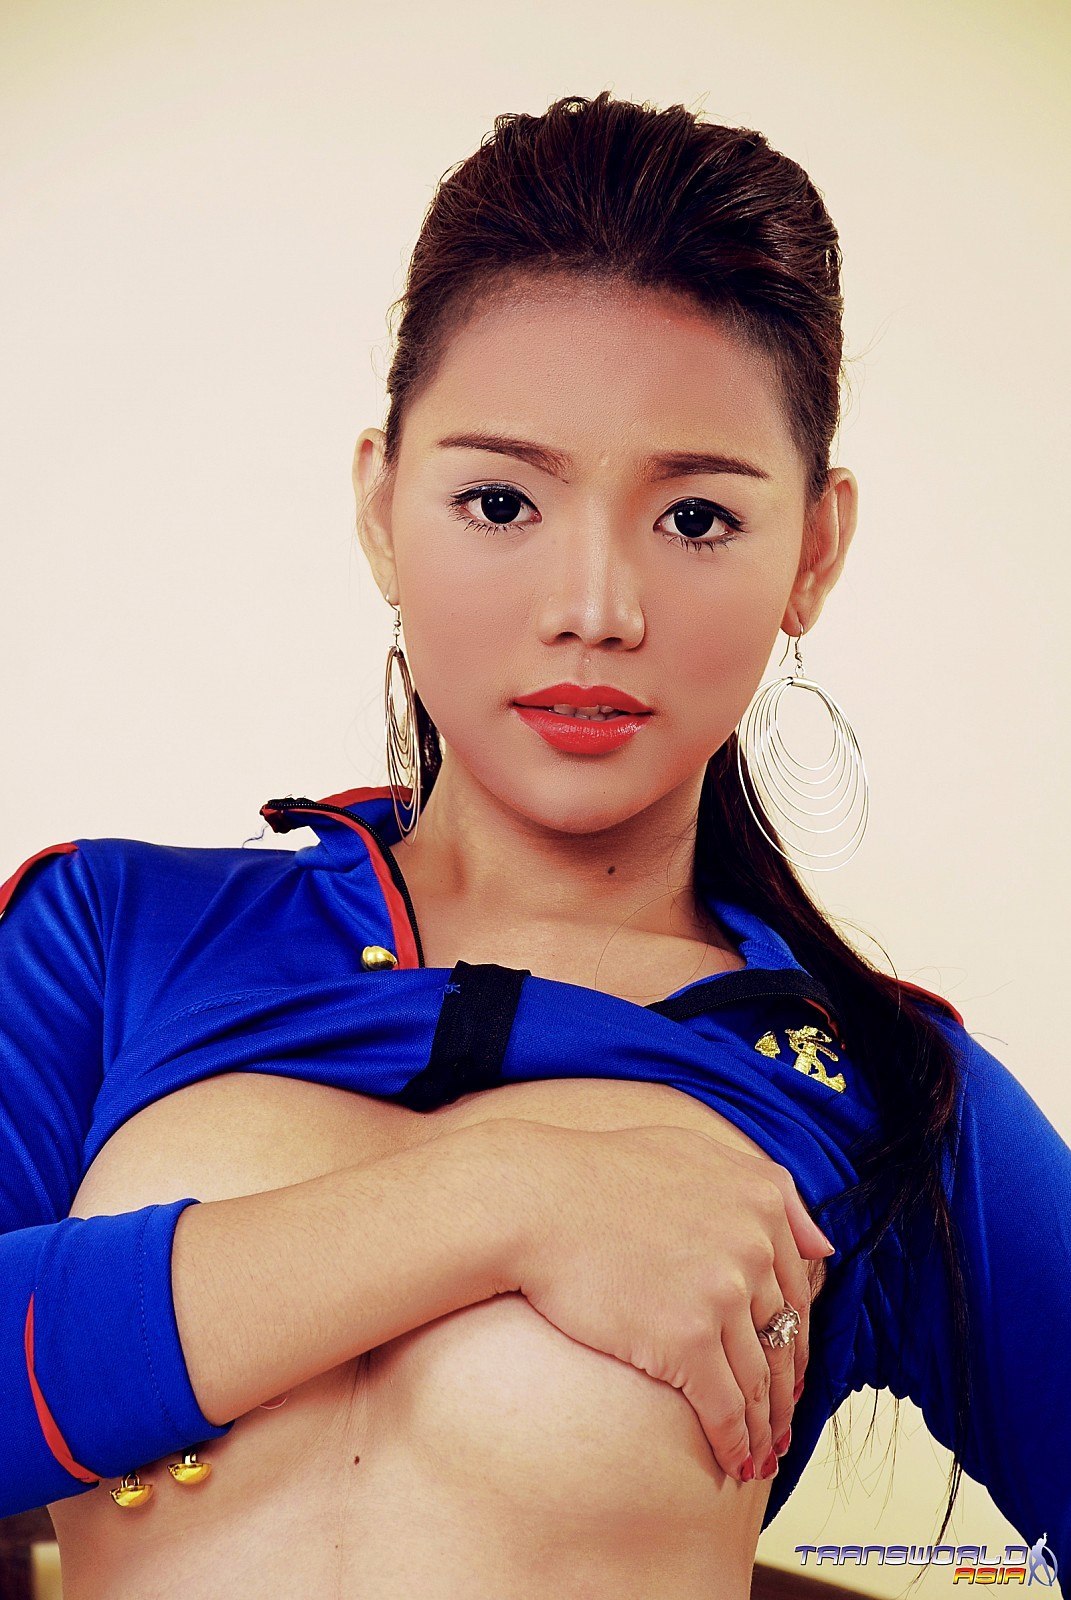 What A GORGEOUS Thai Transexual She Is!